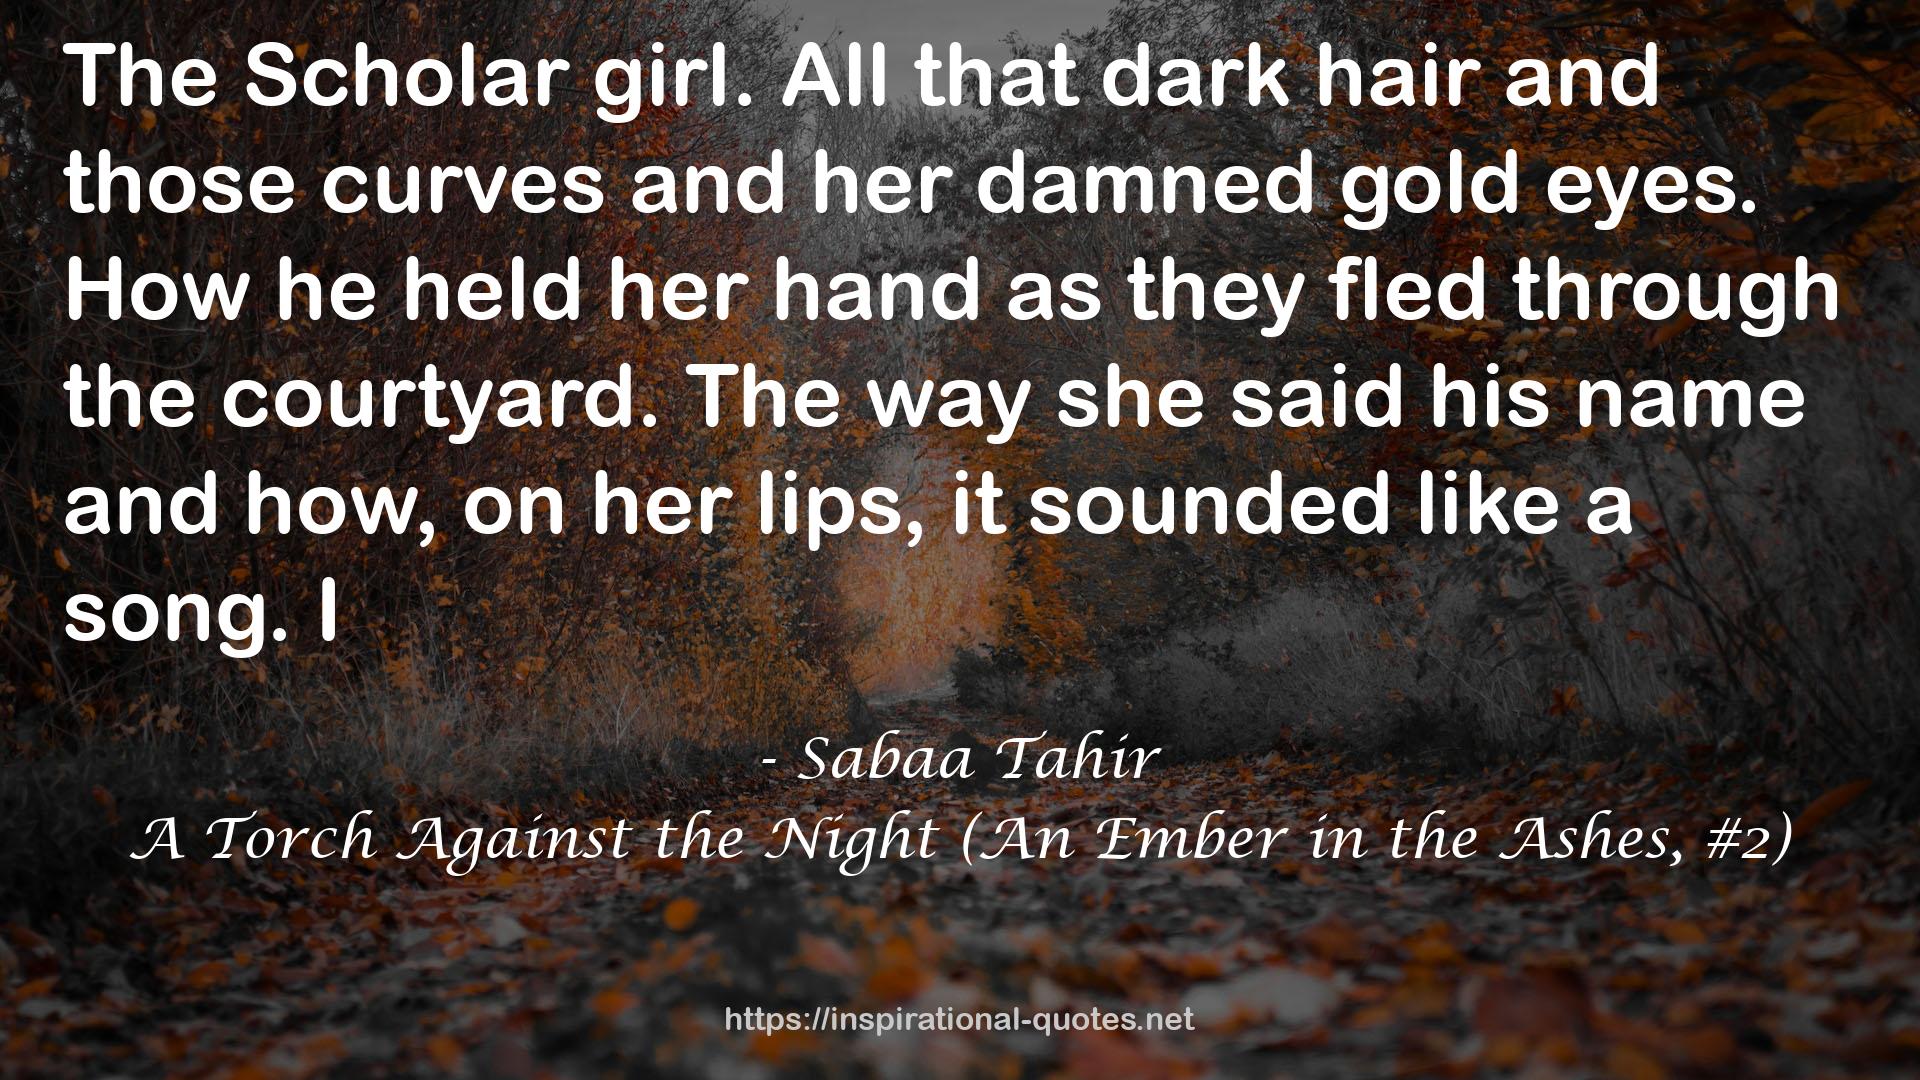 A Torch Against the Night (An Ember in the Ashes, #2) QUOTES